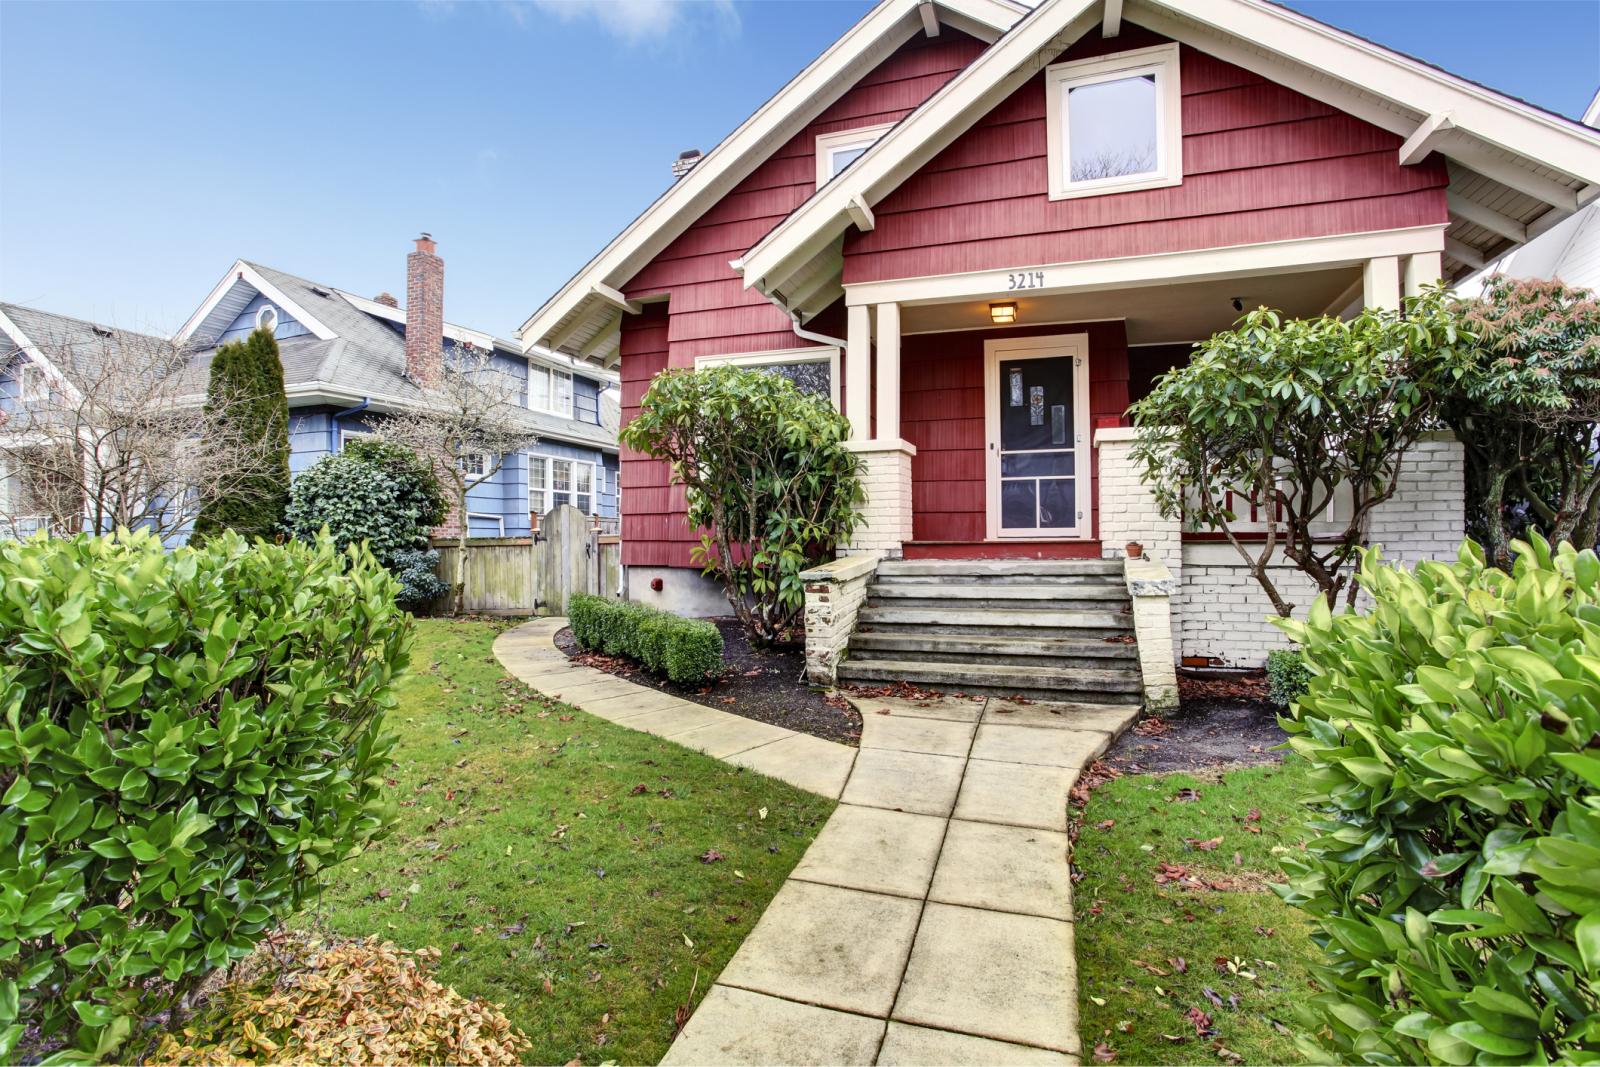 An older red Craftsman-style home. with a lush green yard.